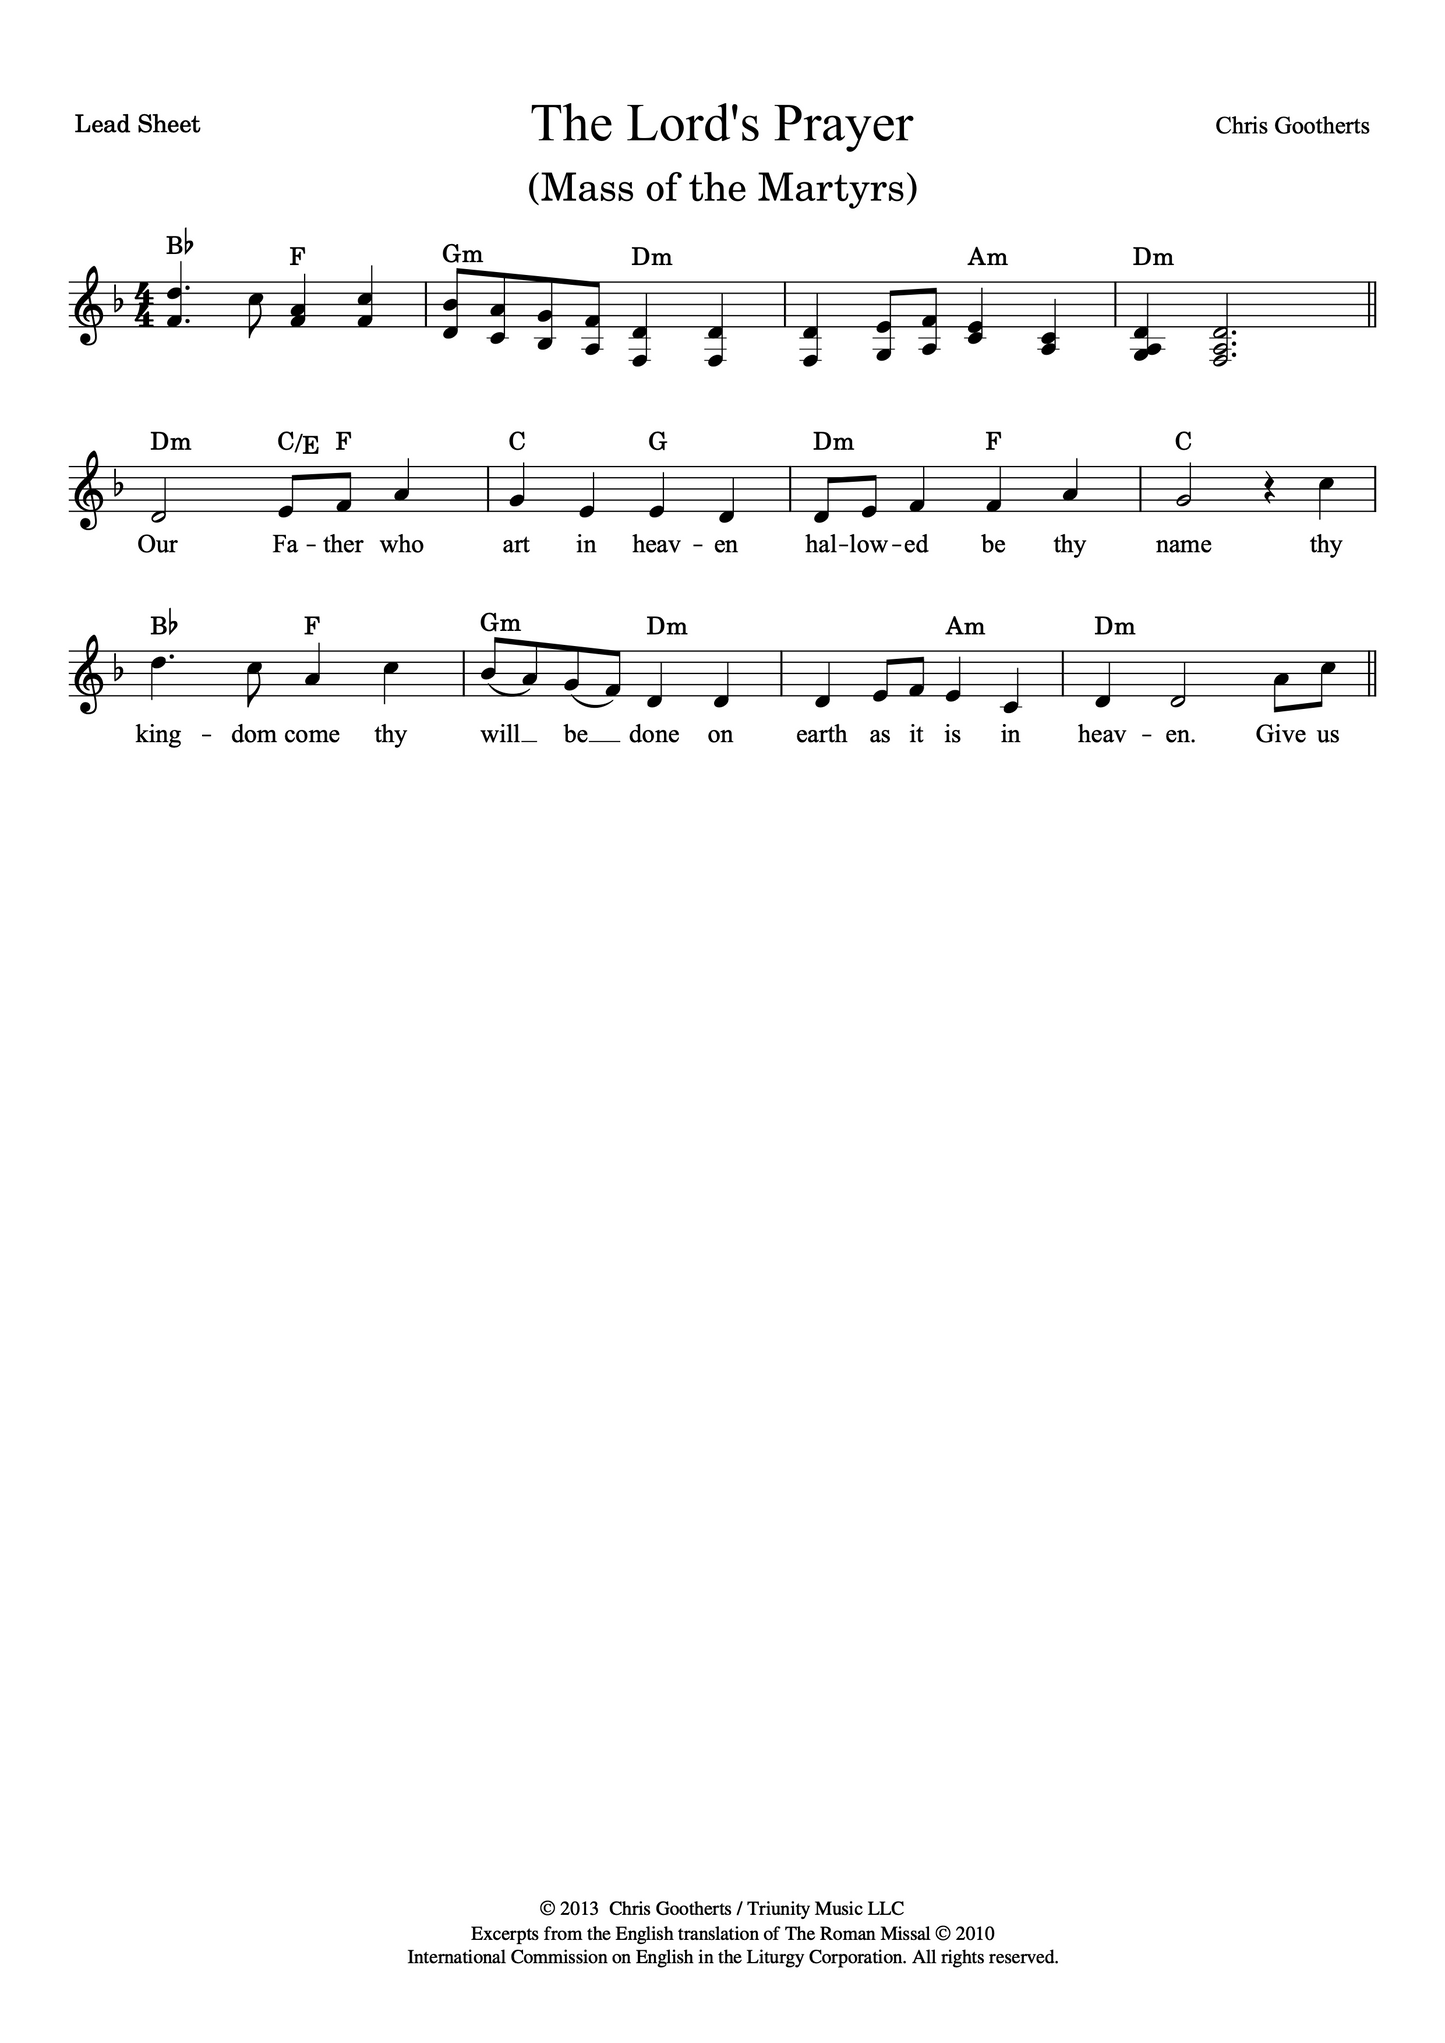 The Lord's Prayer (Lead Sheet)